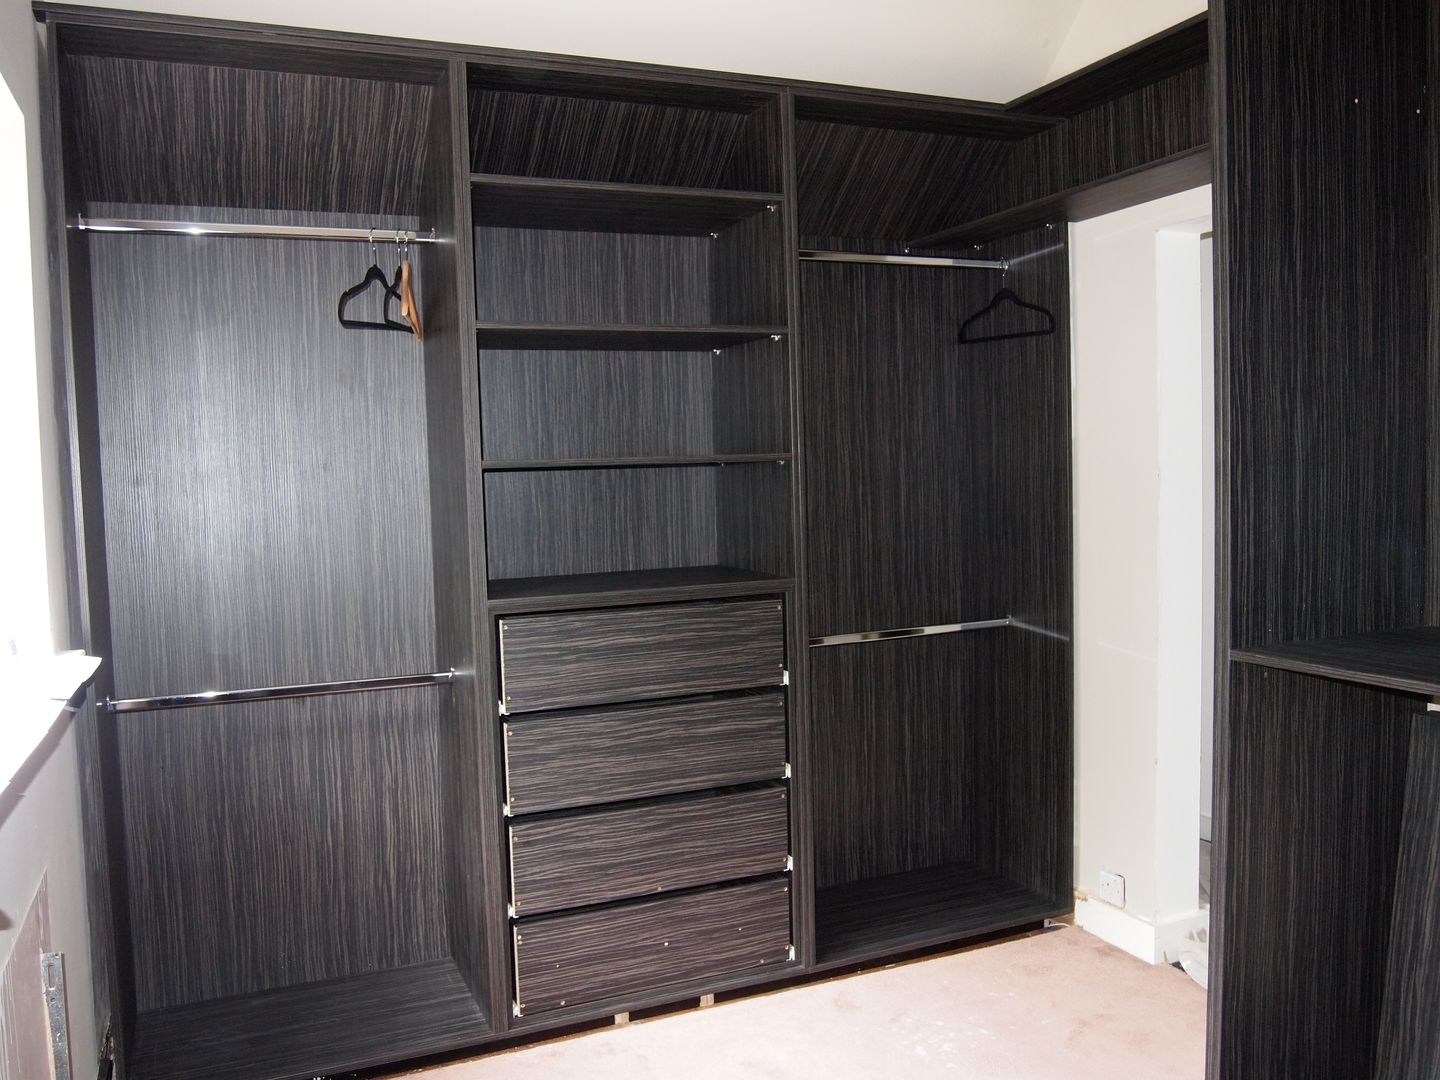 walk in his and her's wardrobes. before and after photos., Designer Vision and Sound: Bespoke Cabinet Making Designer Vision and Sound: Bespoke Cabinet Making Closets modernos